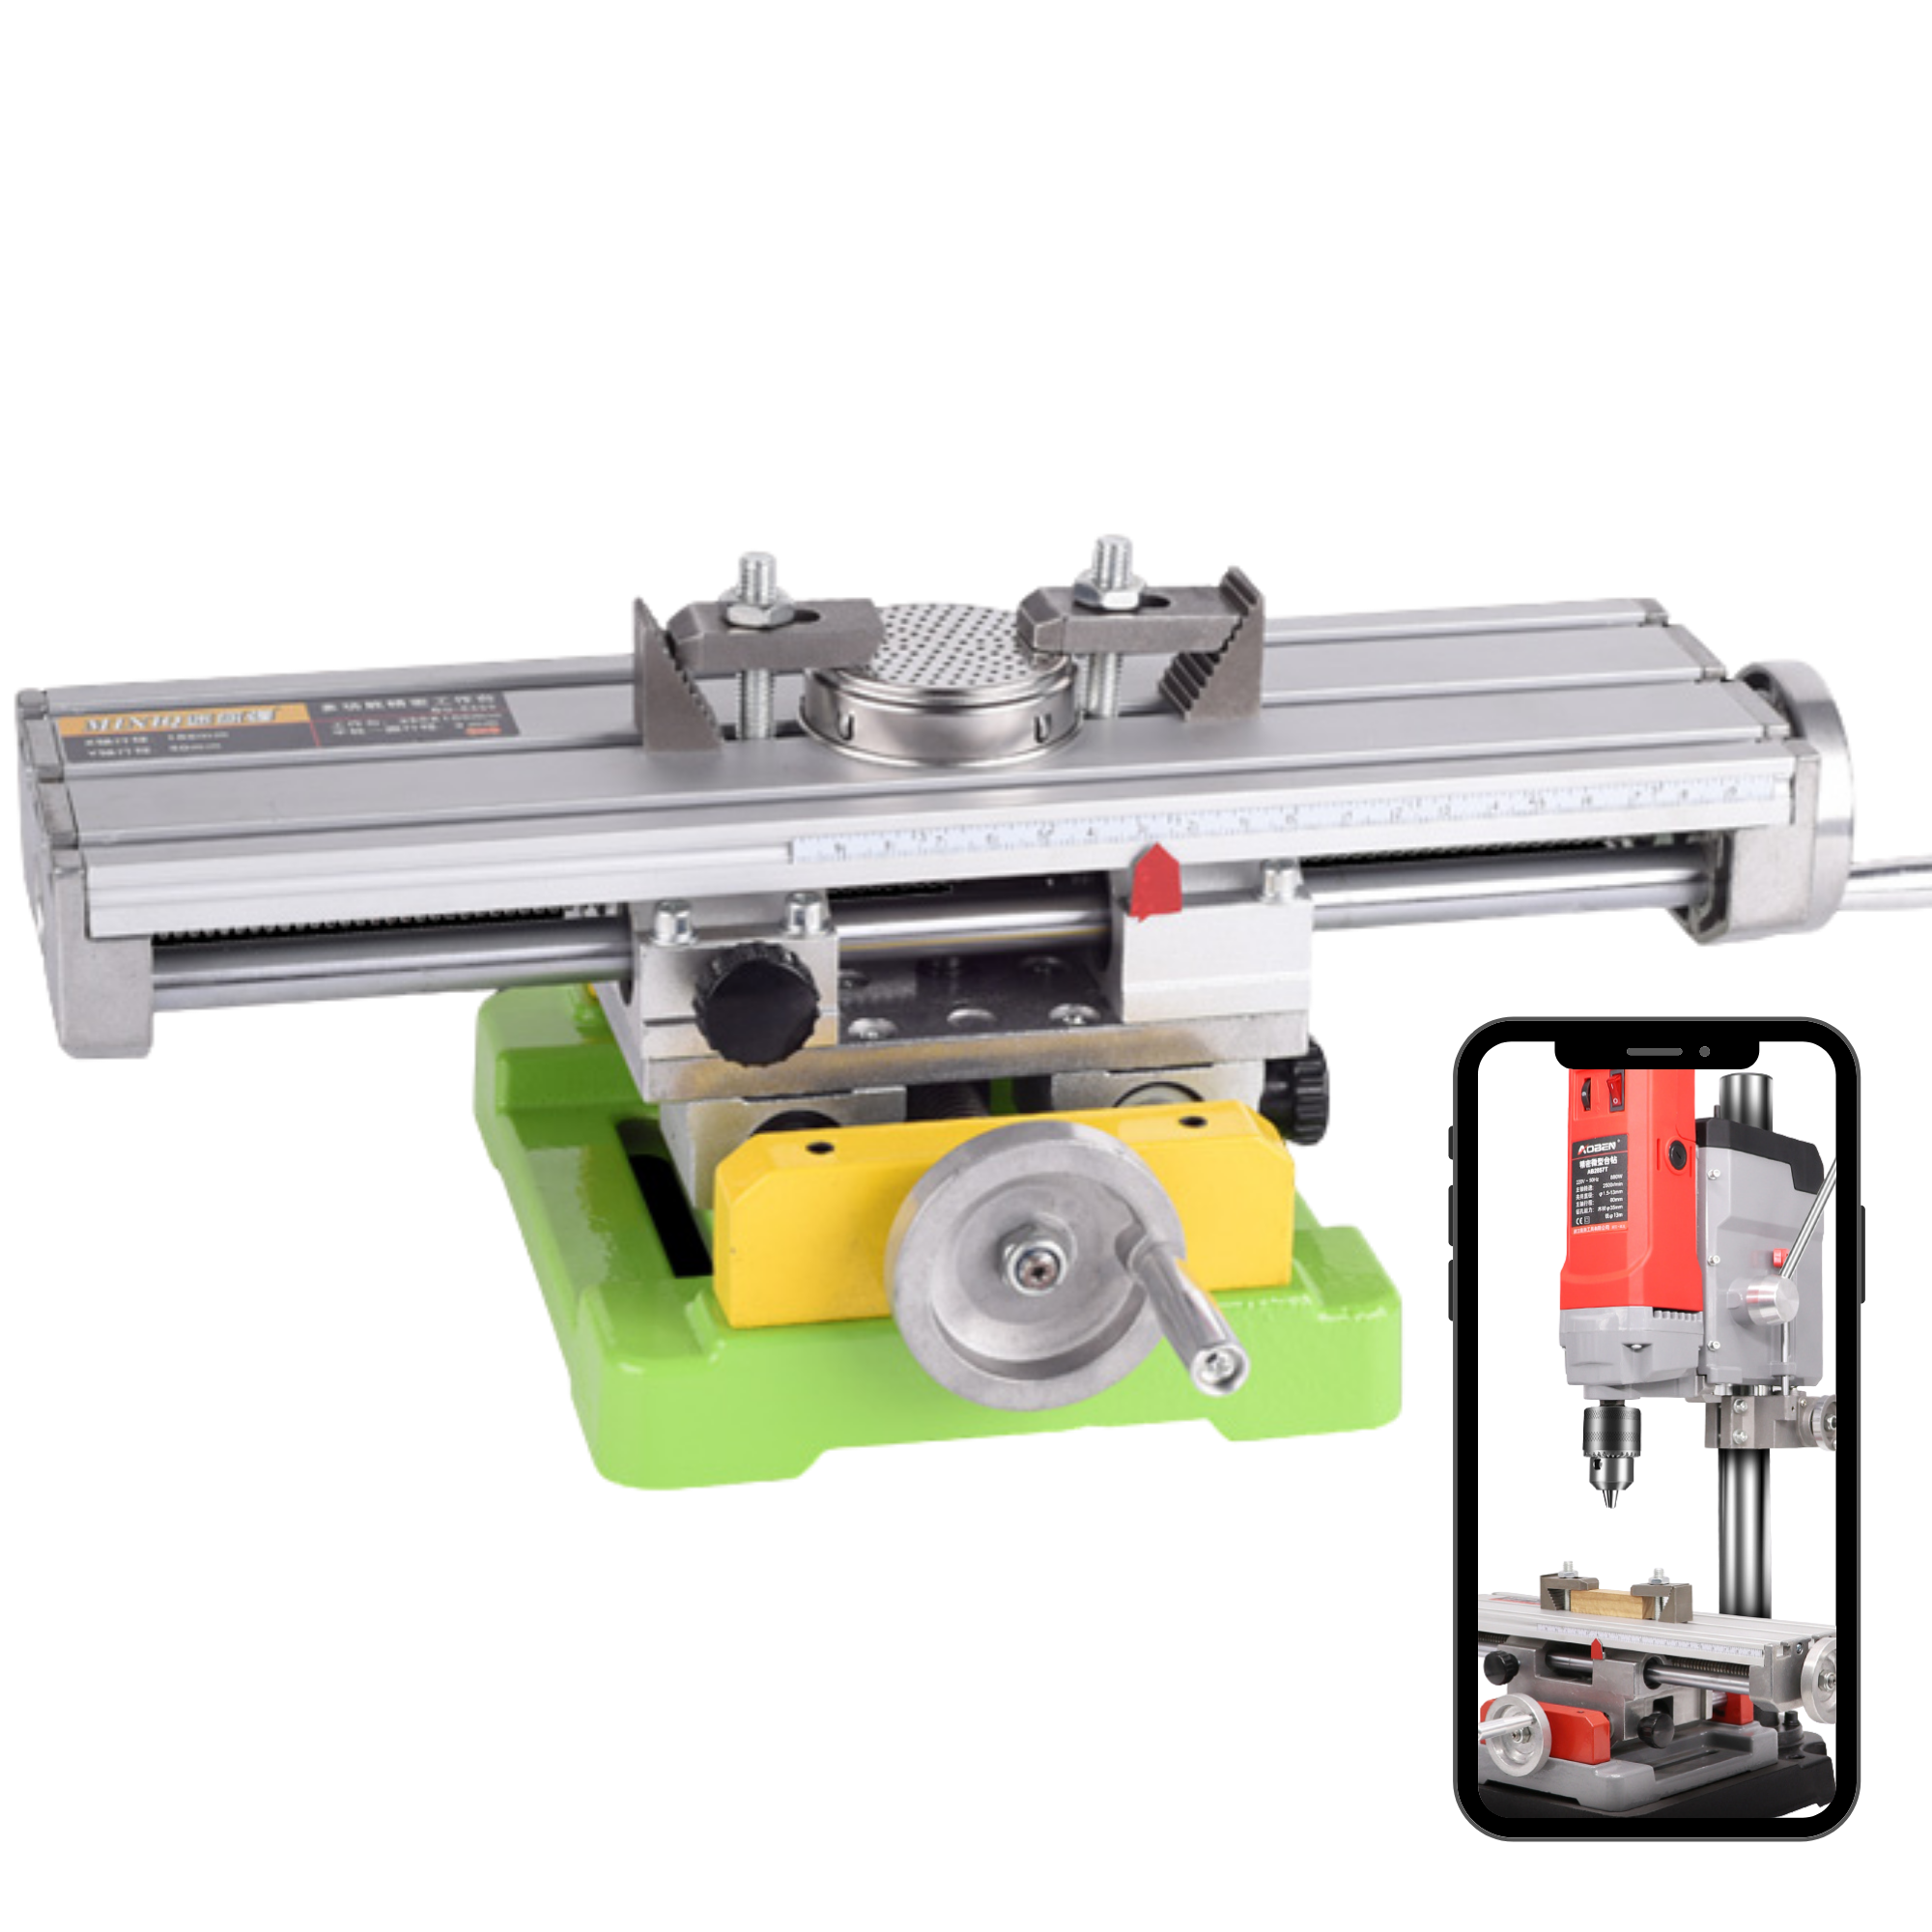 Multifunction Milling Working Table 2 Axis Cross Slide Compound Bench Drill Vise 